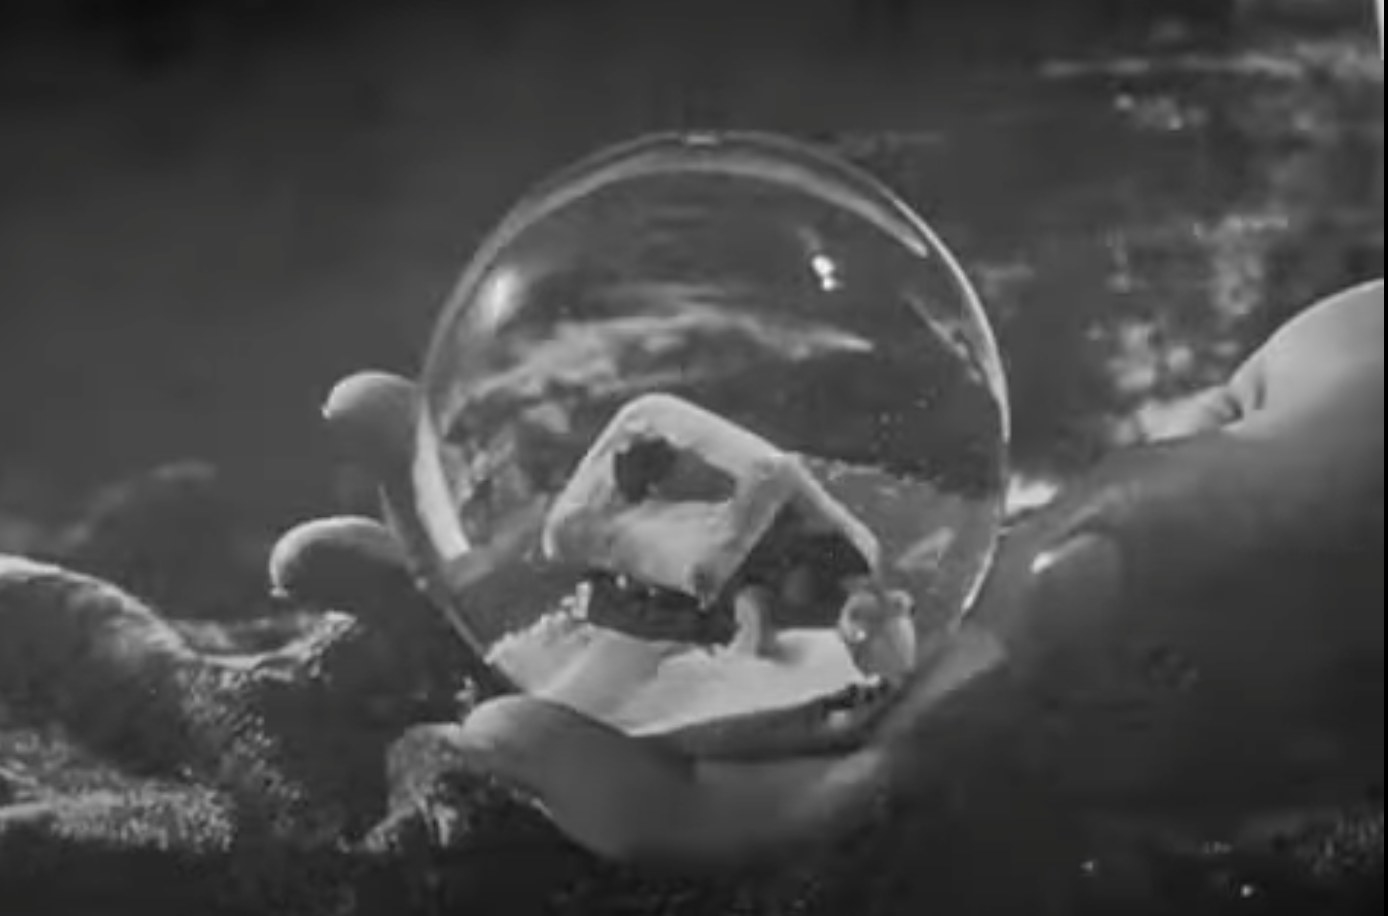 a black and white image of a hand holding a snow globe that contains a small snowy cabin